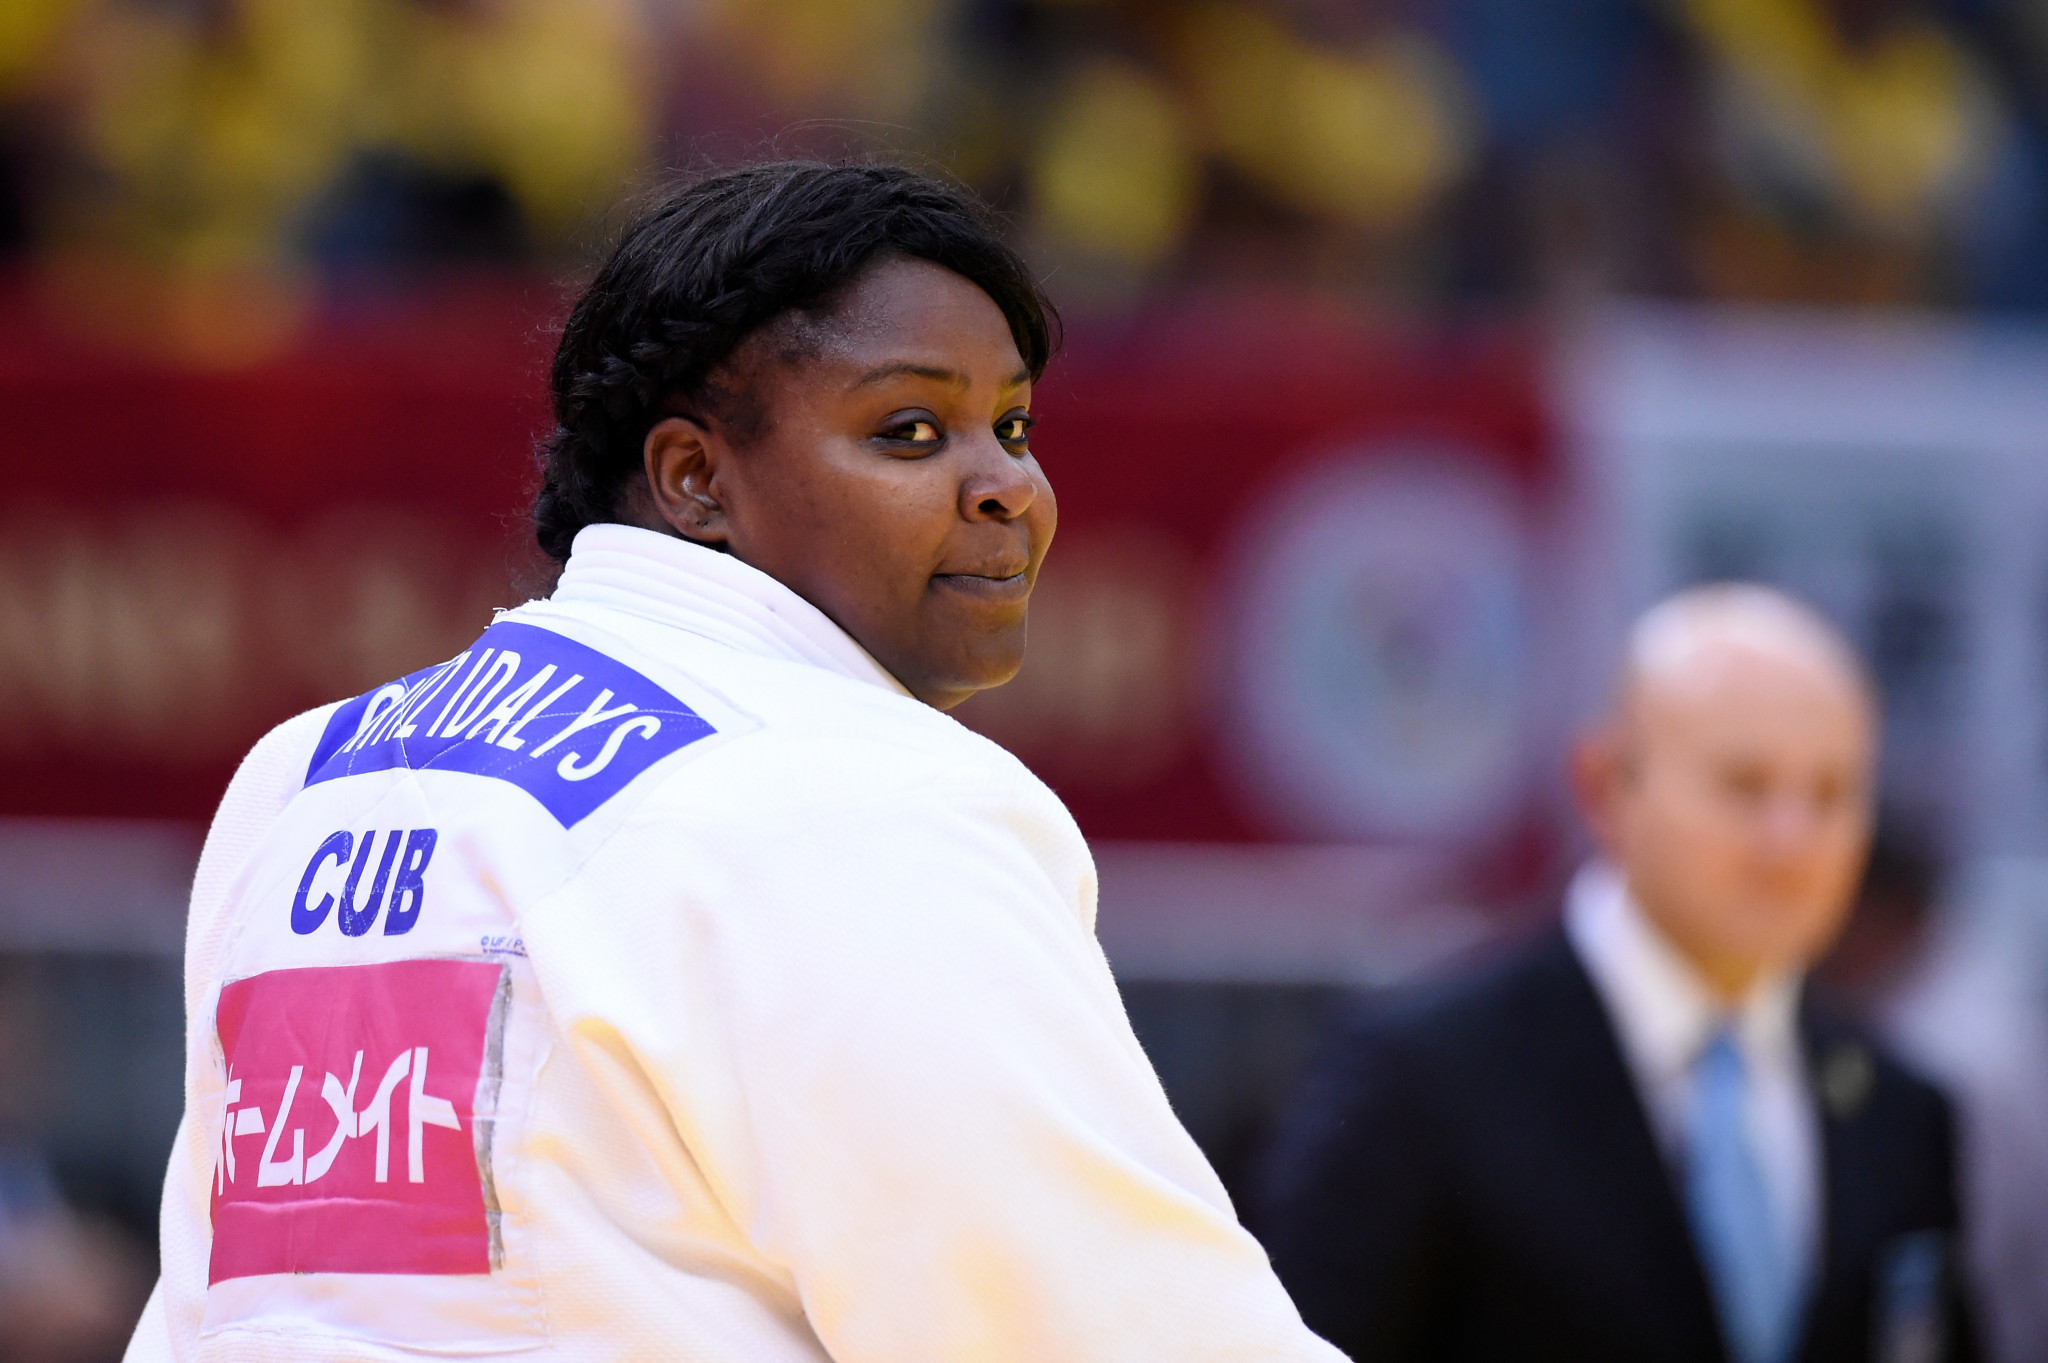 Idalys Ortiz of Cuba is another athlete to look out for at the IJF World Judo Masters in Doha ©Getty Images